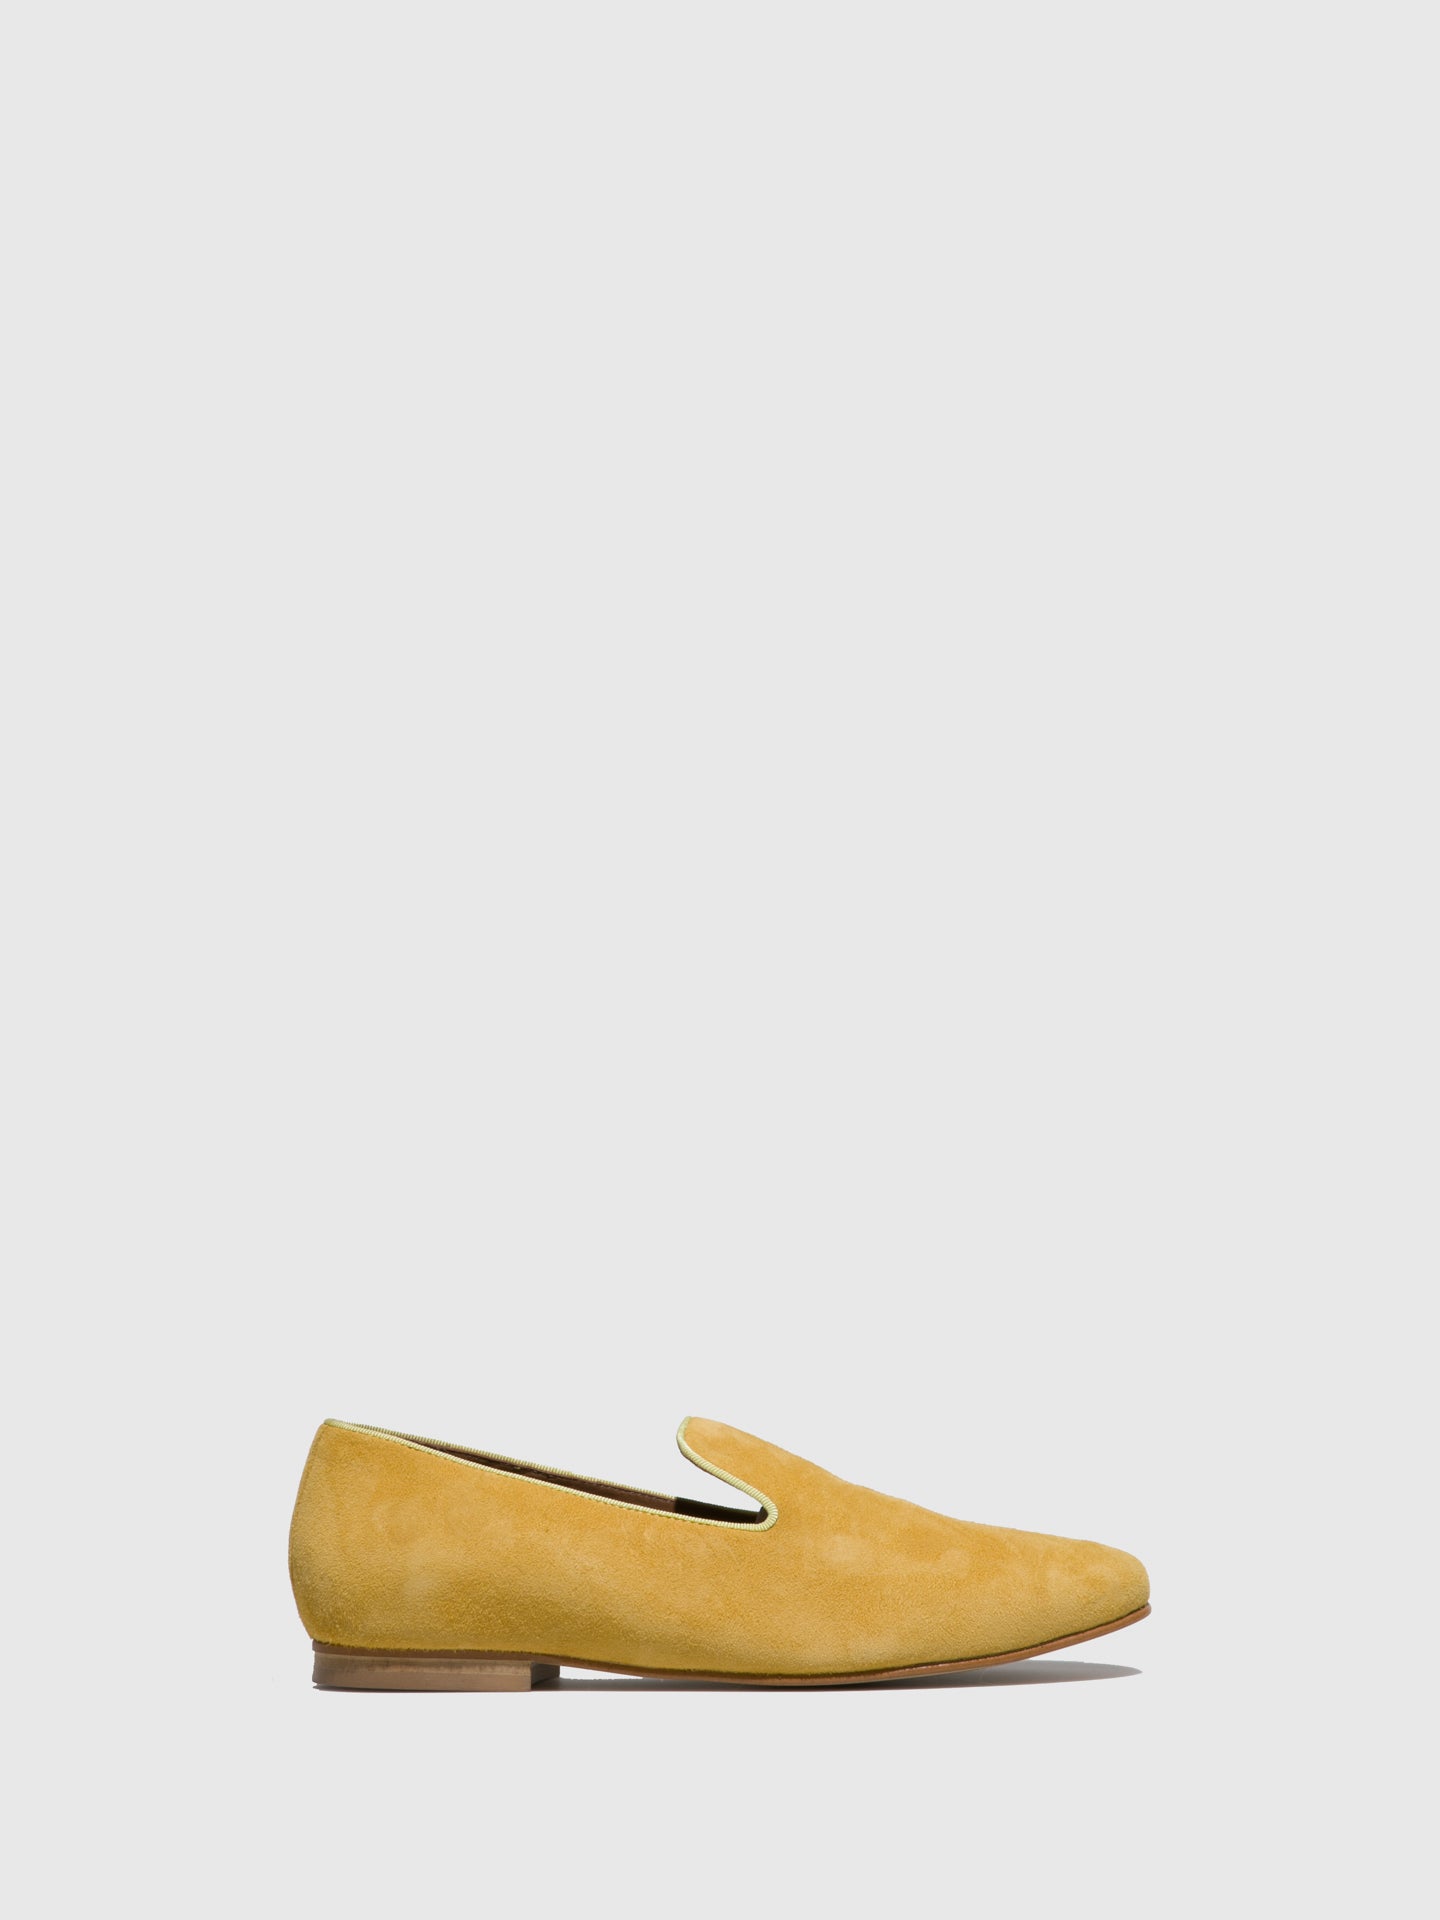 JJ Heitor Yellow Suede Loafers Shoes